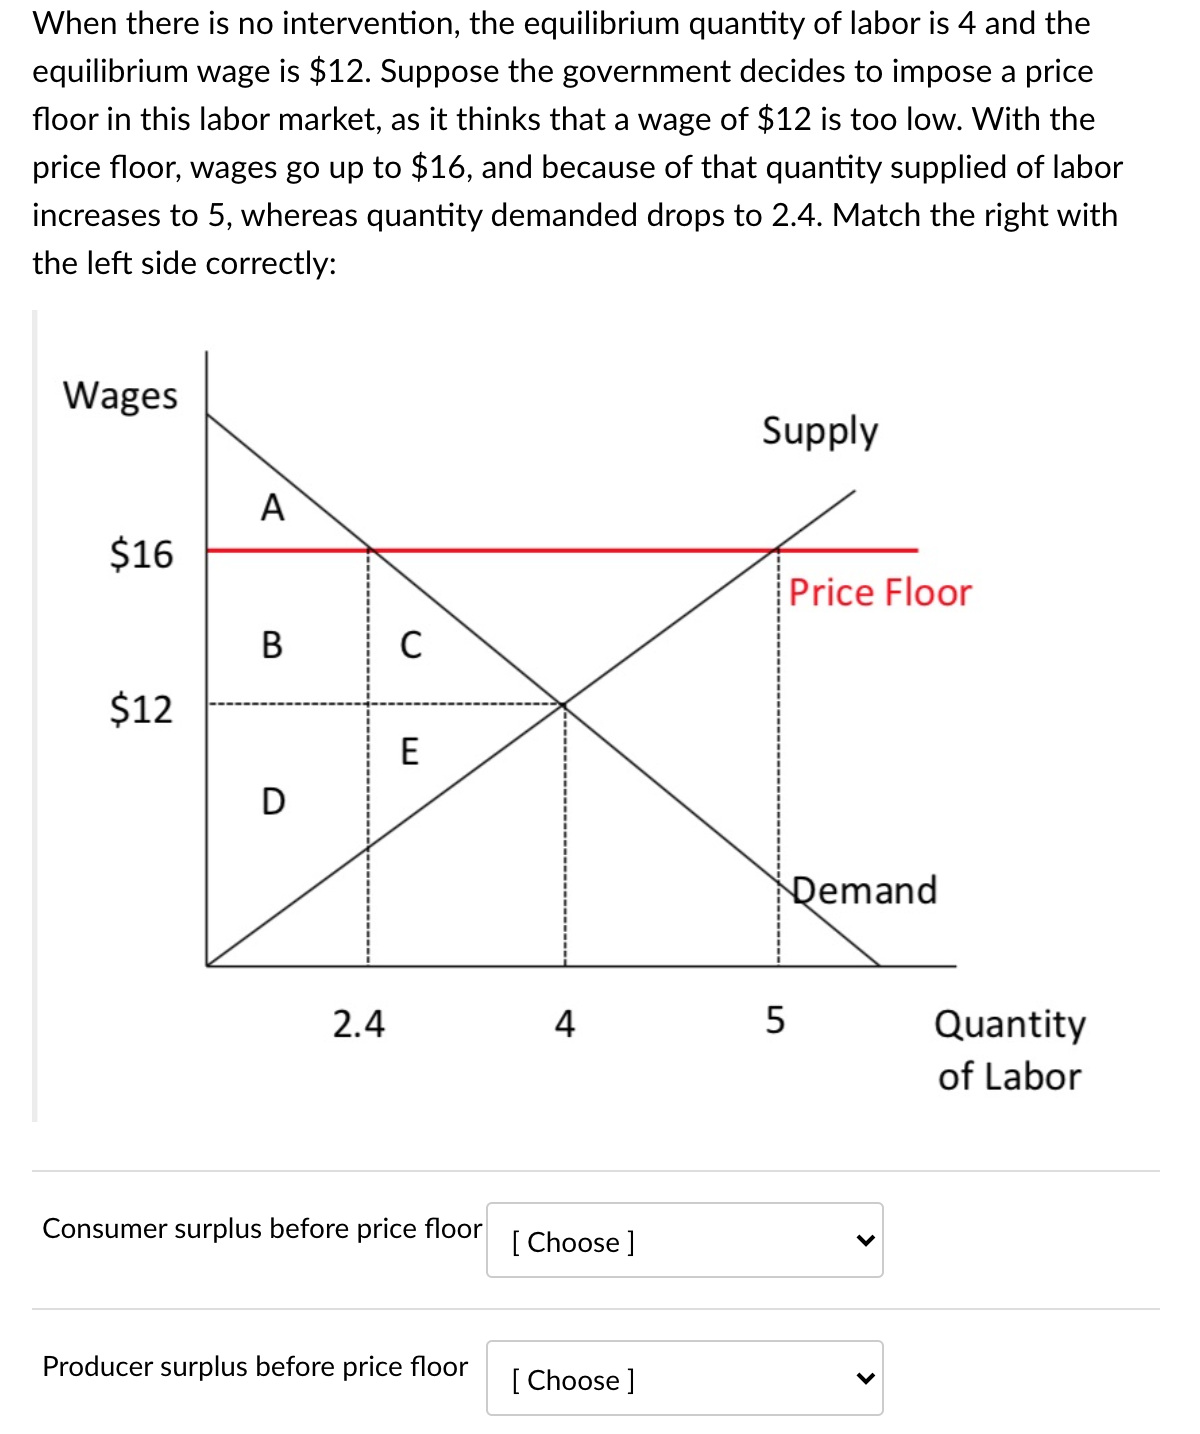 When there is no intervention, the equilibrium quantity of labor is 4 and the
equilibrium wage is $12. Suppose the government decides to impose a price
floor in this labor market, as it thinks that a wage of $12 is too low. With the
price floor, wages go up to $16, and because of that quantity supplied of labor
increases to 5, whereas quantity demanded drops to 2.4. Match the right with
the left side correctly:
Wages
Supply
A
$16
Price Floor
$12
E
D
Demand
2.4
4
5
Quantity
of Labor
Consumer surplus before price floor
[ Choose ]
Producer surplus before price floor
[ Choose ]
>
>
B.
